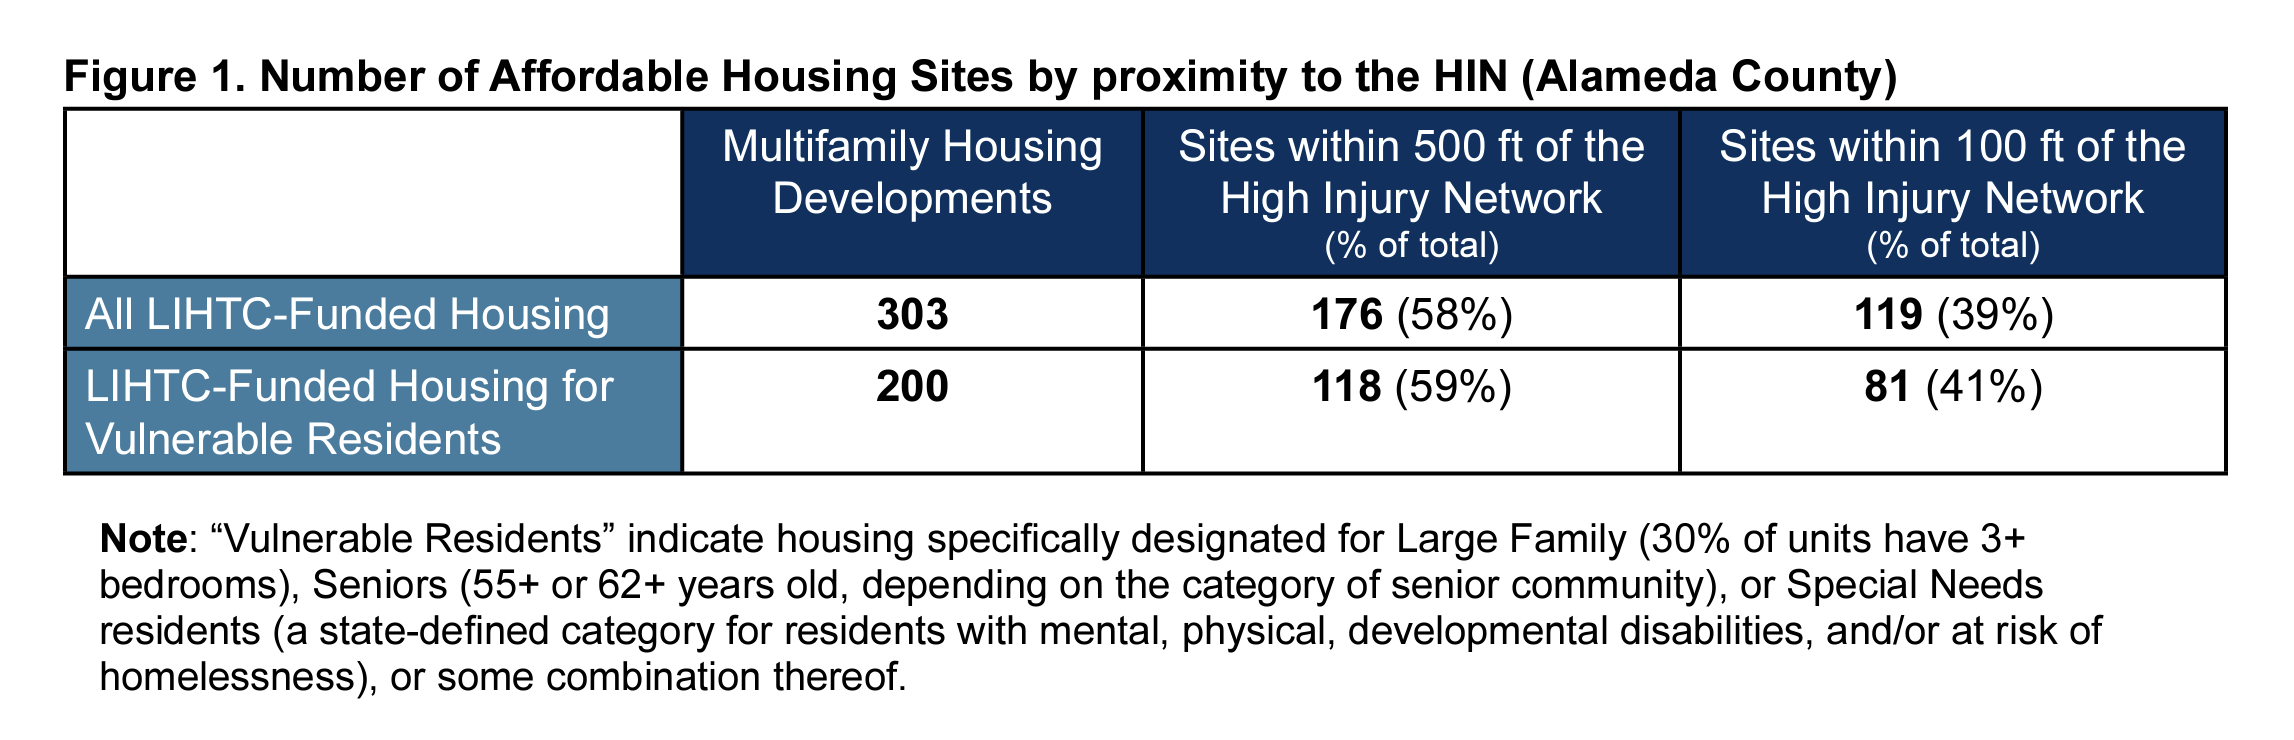 A table that shows the number of affordable housing sites by proximity to the High Injury Network in Alameda County